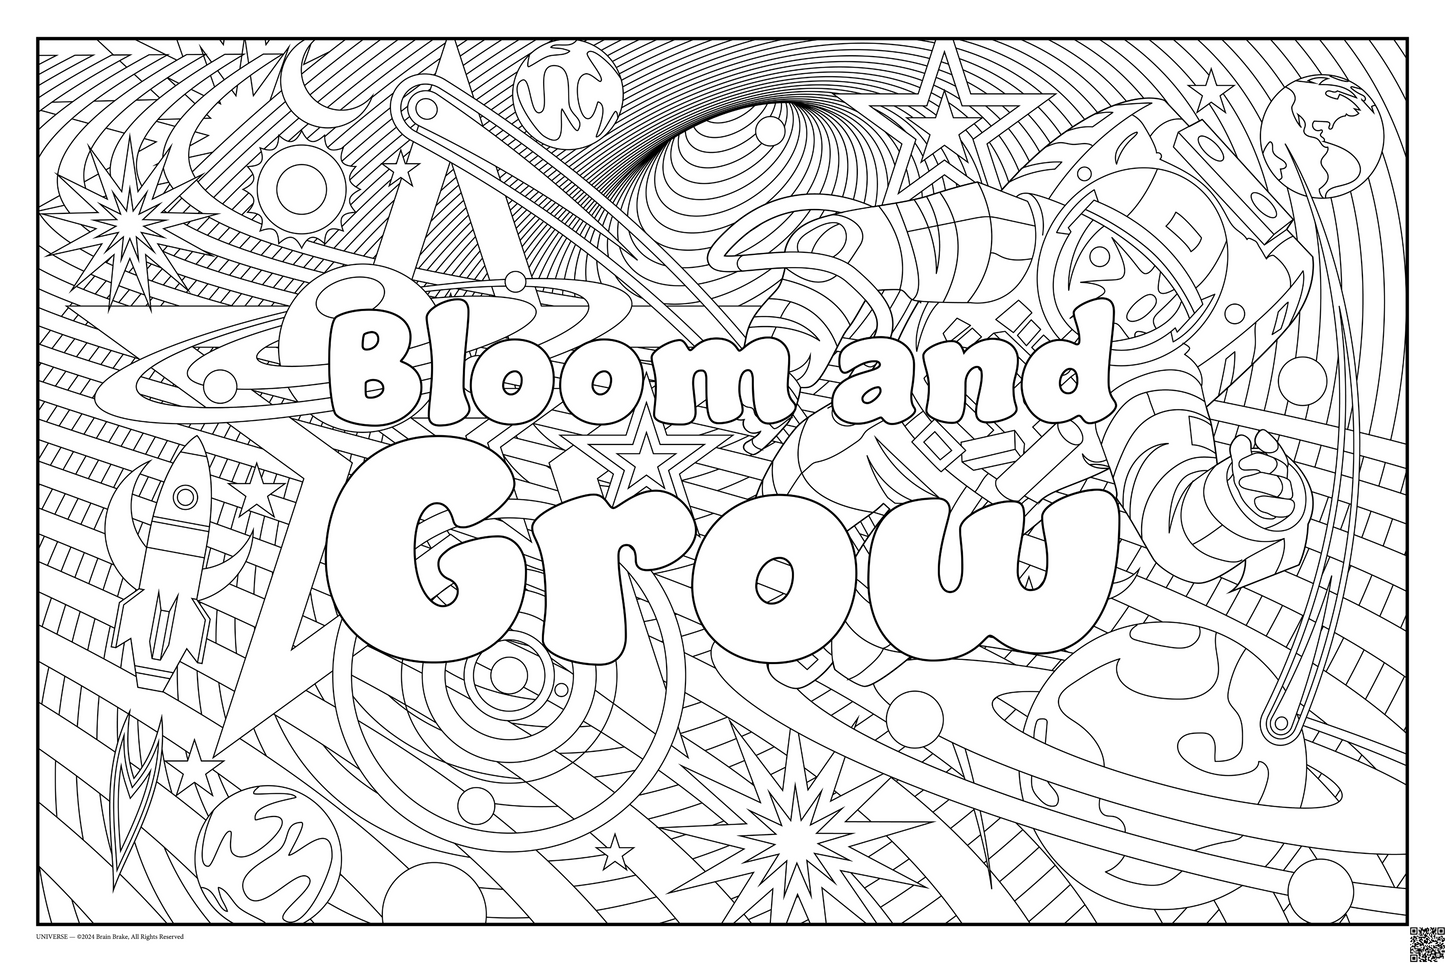 Build Community: Bloom and Grow